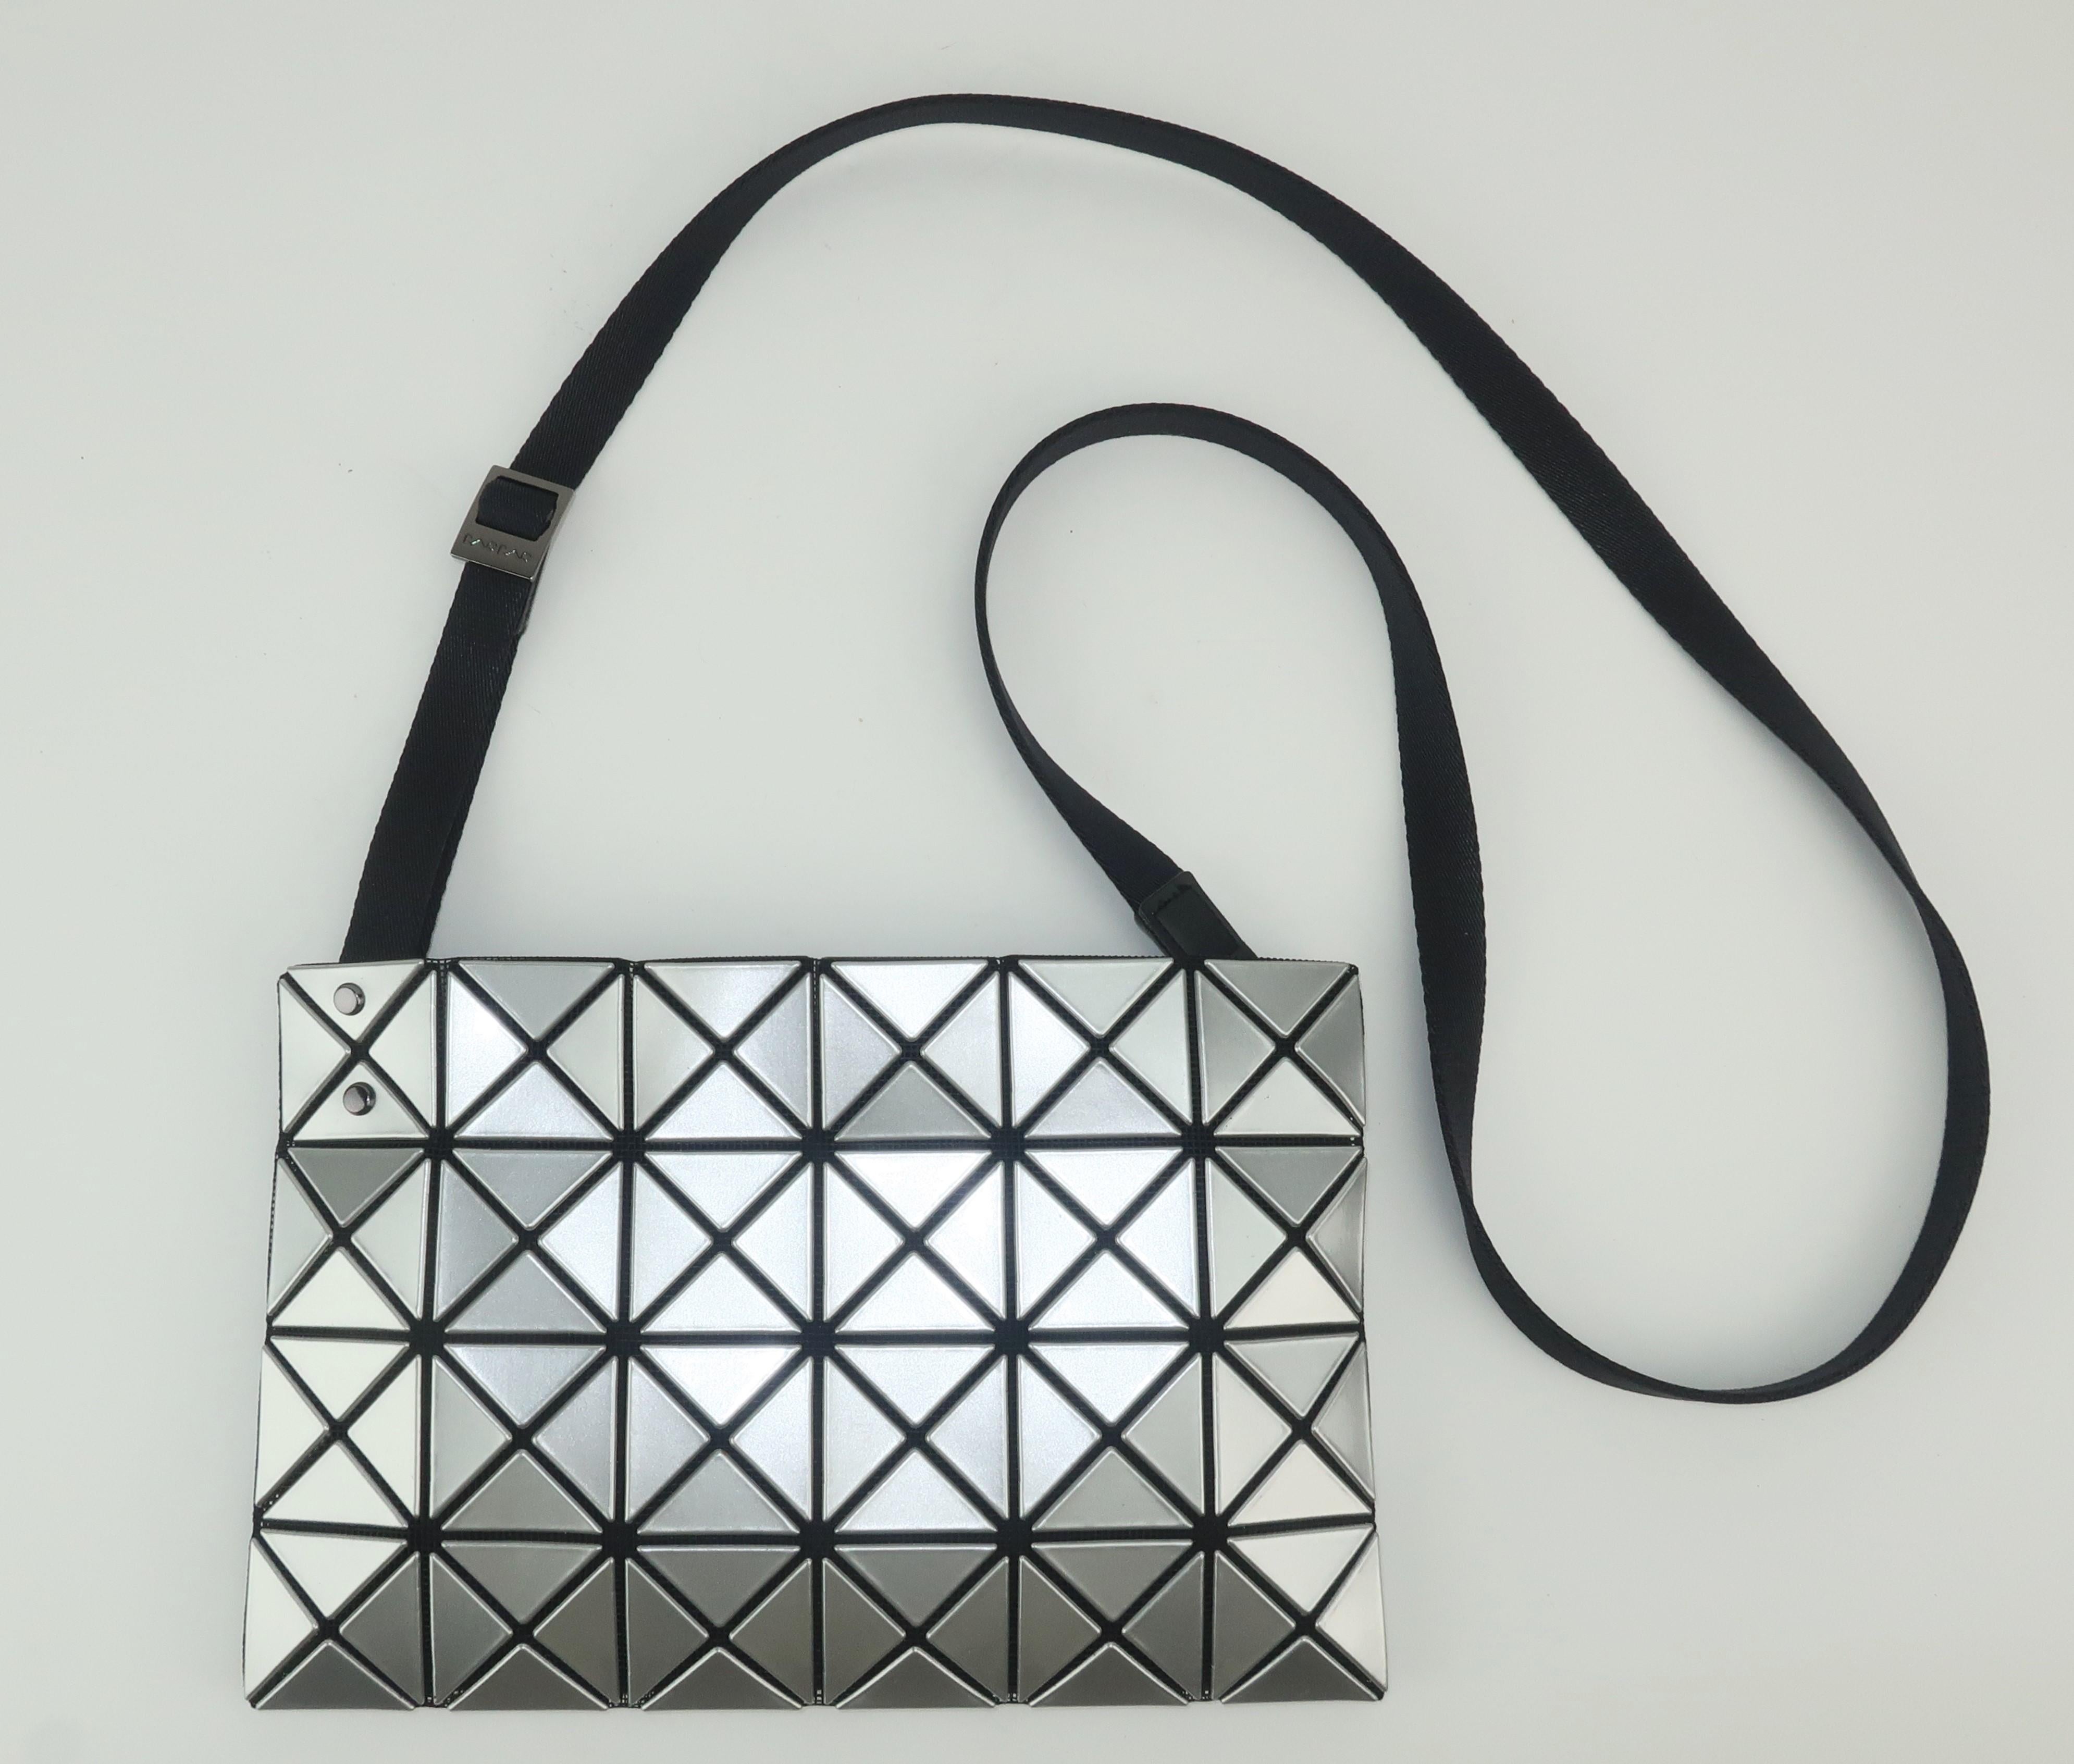 Innovative Japanese designer, Issey Miyake, created the Bao Bao line in 2000 producing handbags with a unique geometric surface.  The space age look is designed to provide a comfortable accessory that produces 'shapes made by chance' depending on